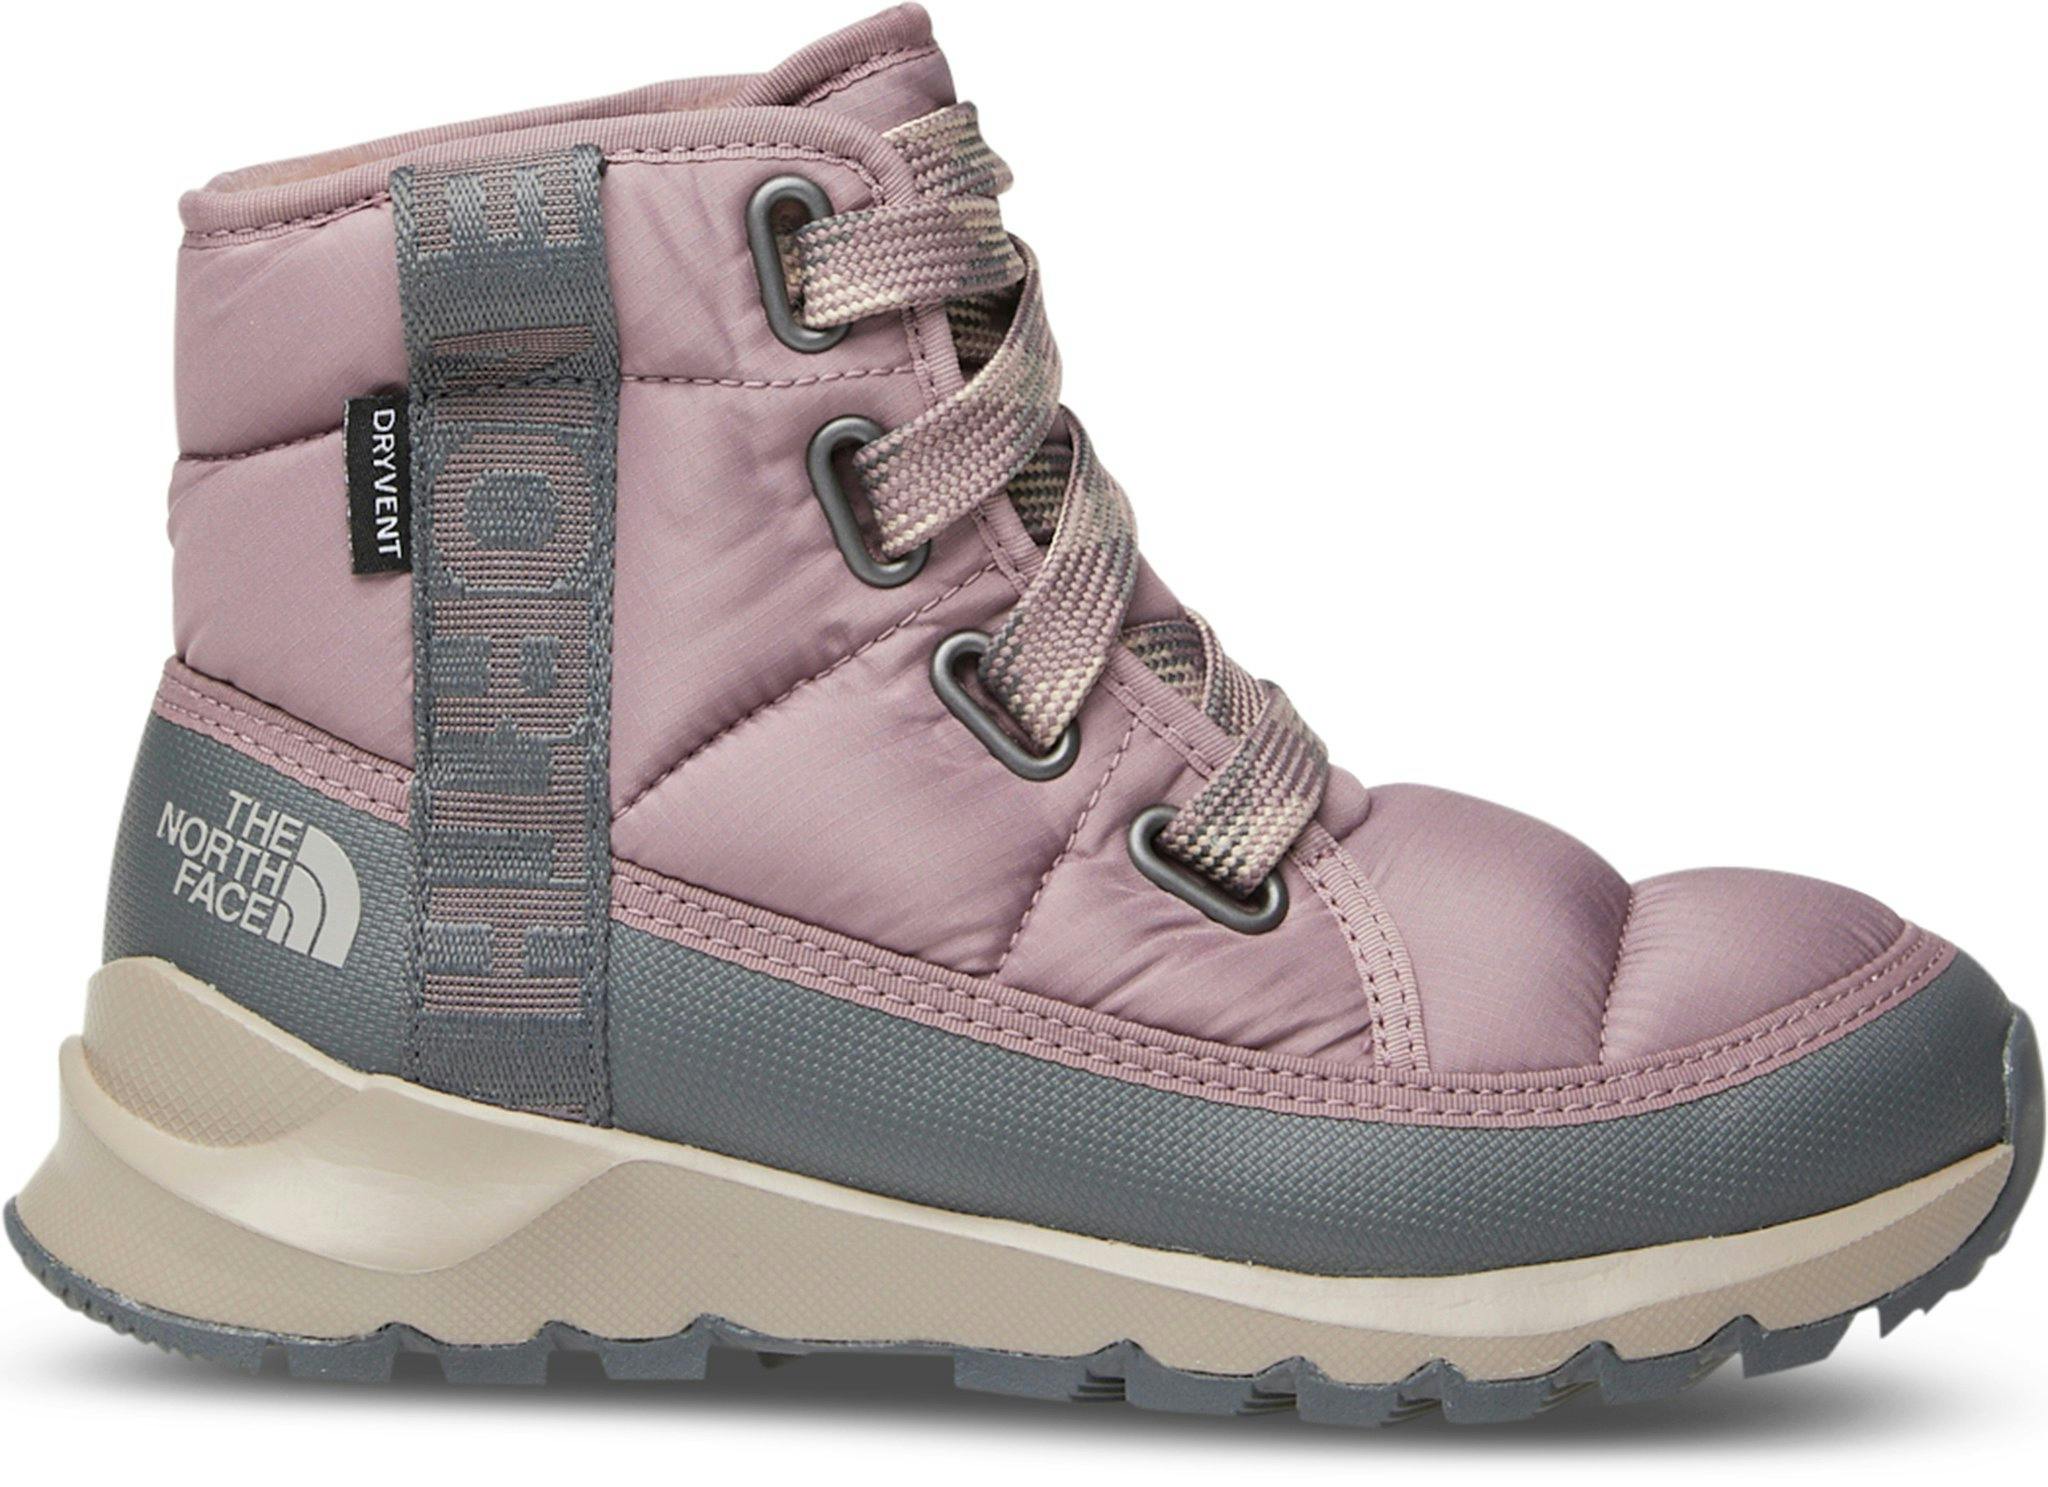 Product image for ThermoBall Luxe Lace Up Waterproof Boots - Women's